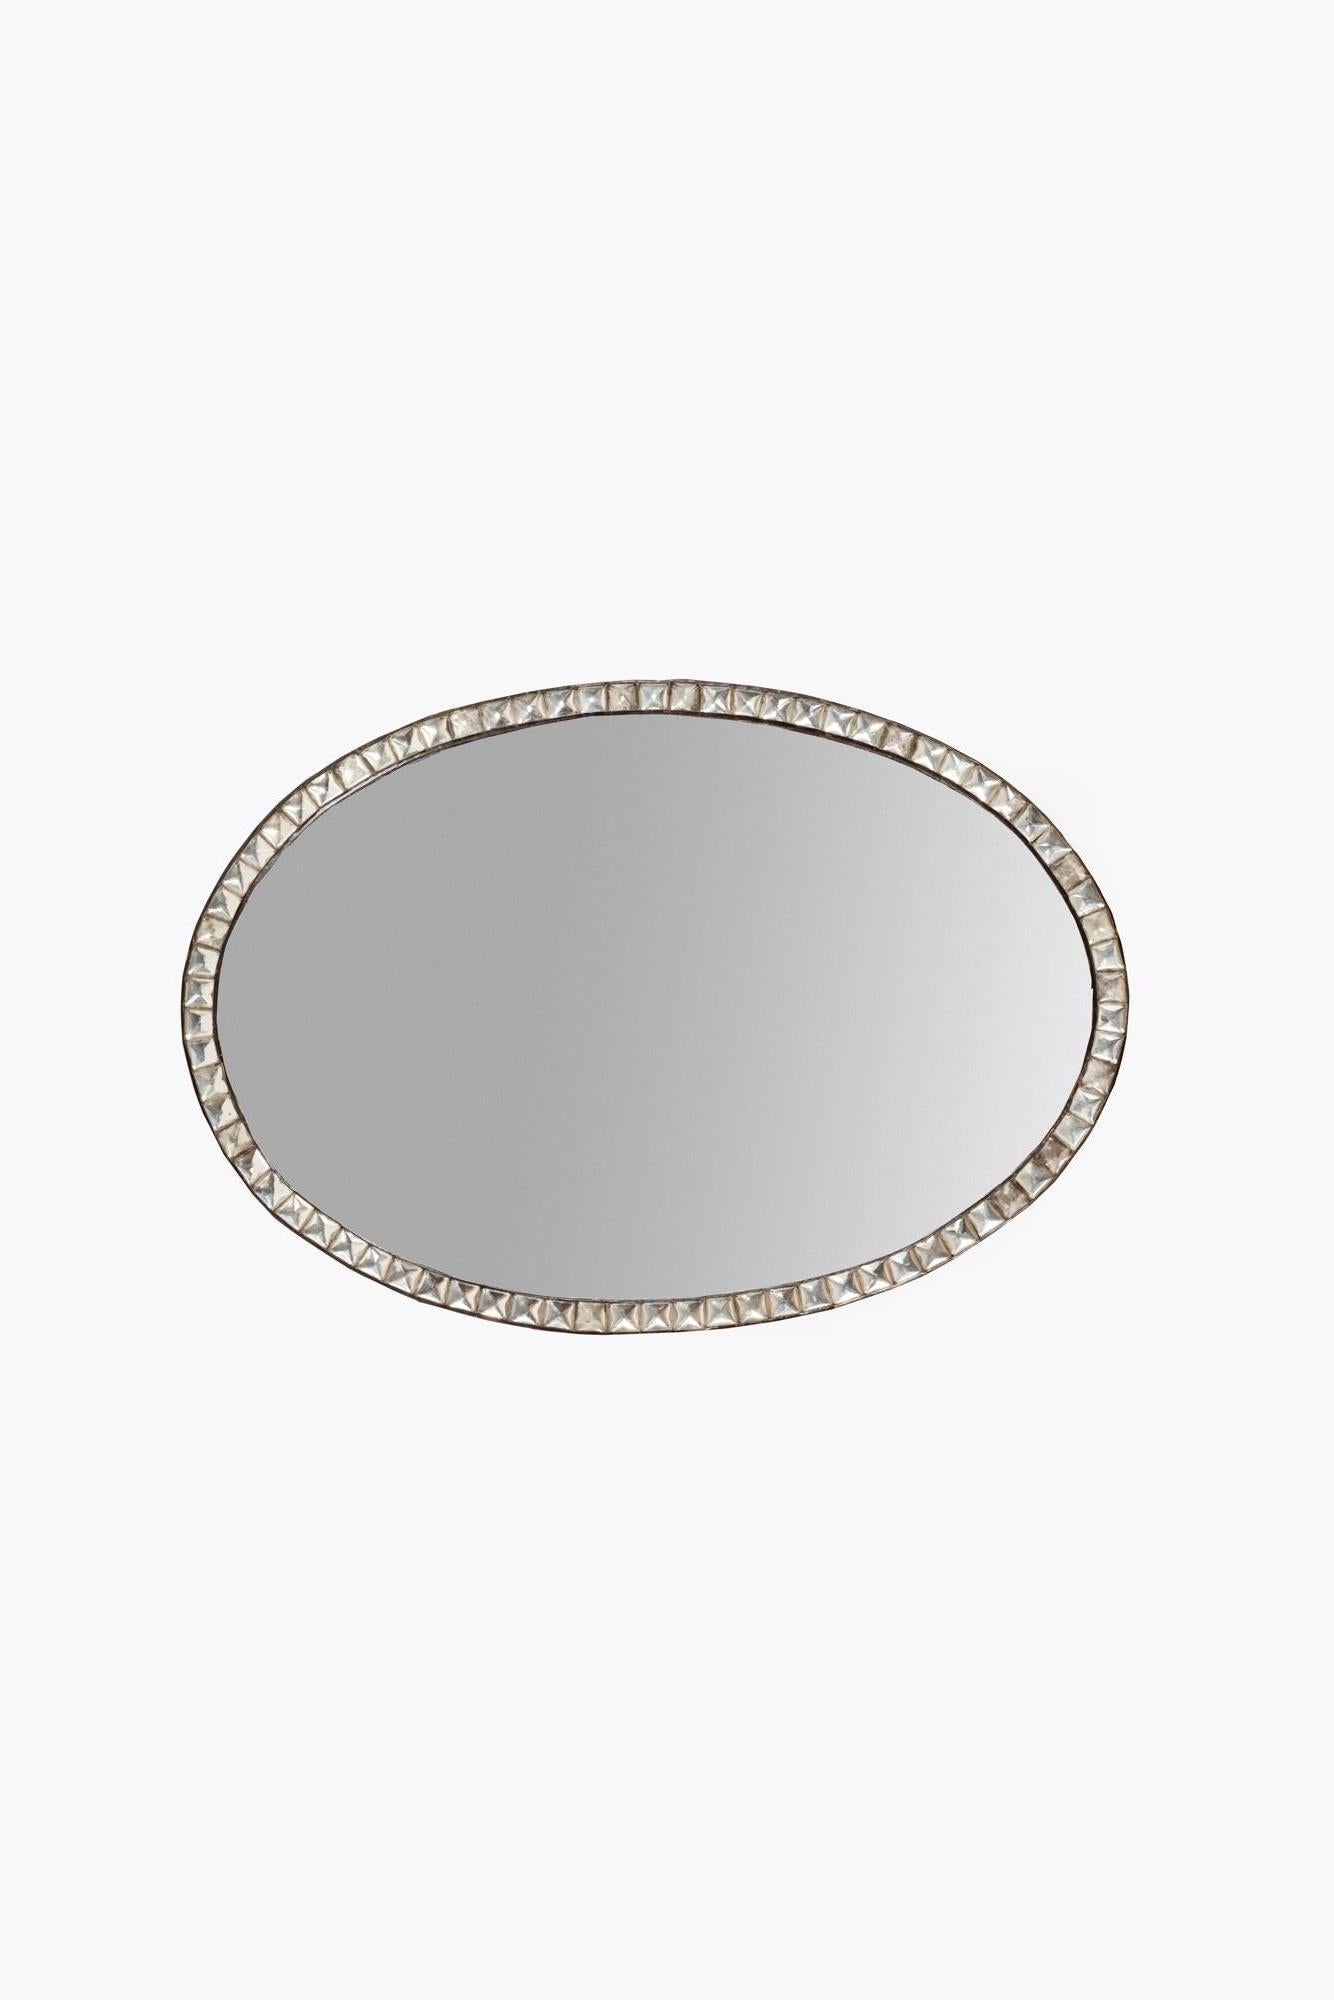 18th Century Irish Waterford mirror, the period plate of oval form set within frame of faceted clear glass studs. This beautifully emulates the Waterford style. Circa 1760.